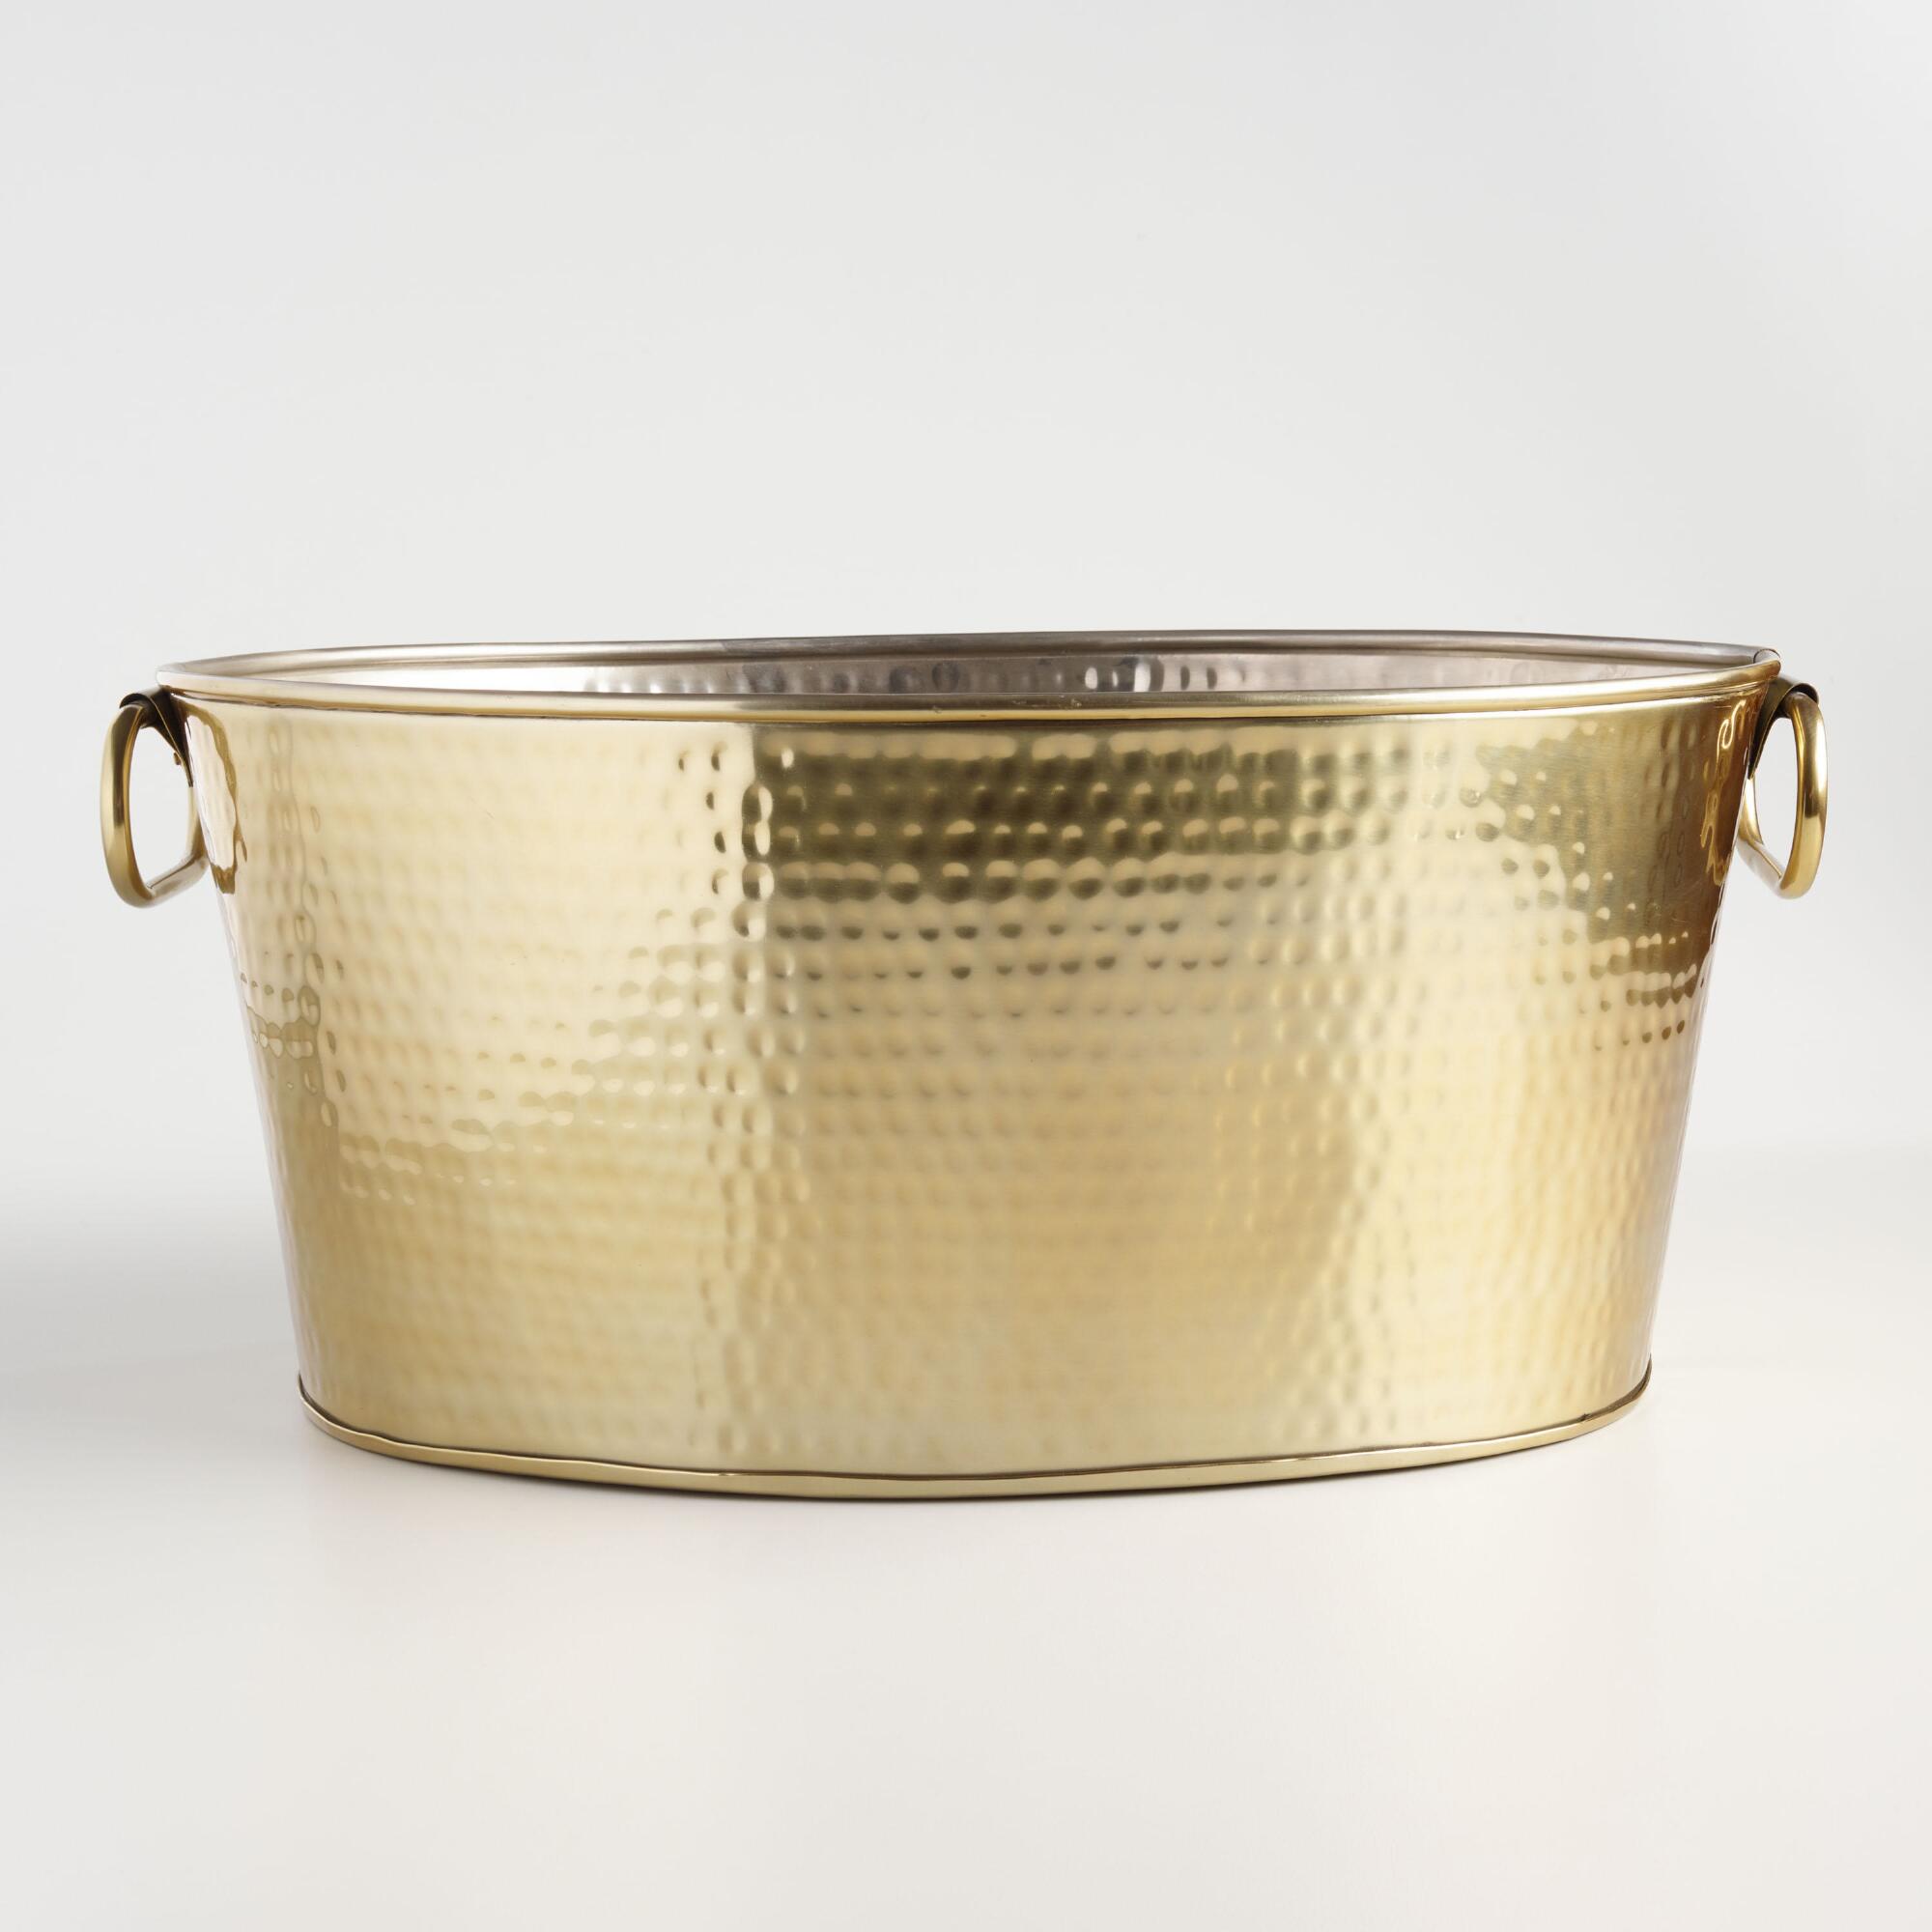 Hammered Gold Stainless Steel Beverage Tub